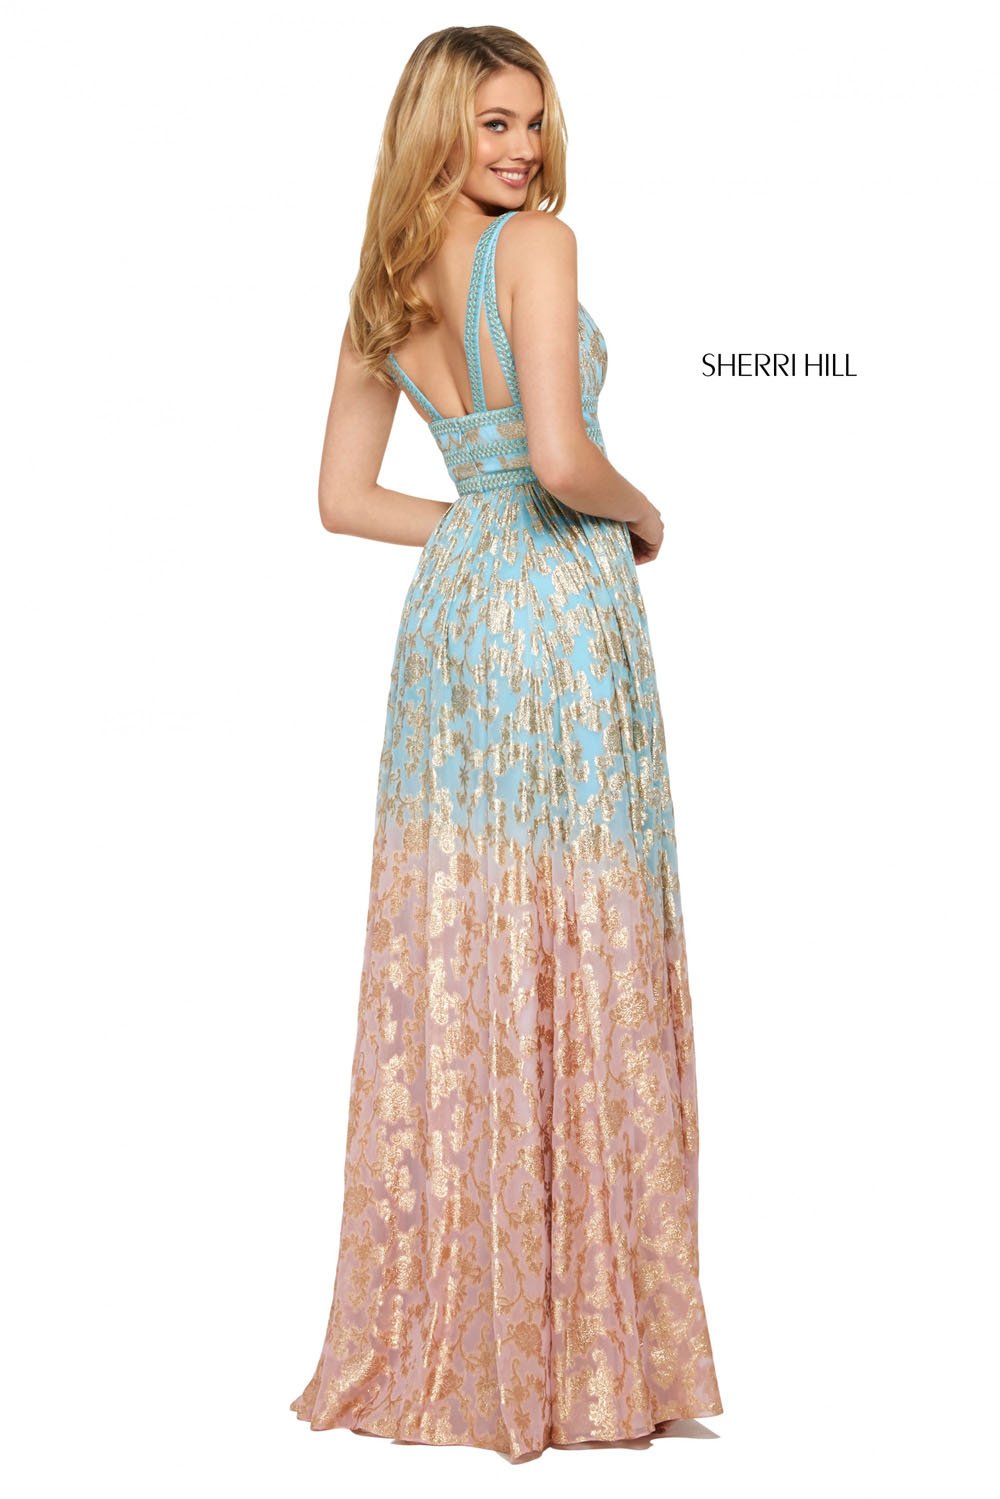 Sherri Hill 53375 dress images in these colors: Light Blue Pink, Nude Aqua, Lilac Gold, Periwinkle Coral.